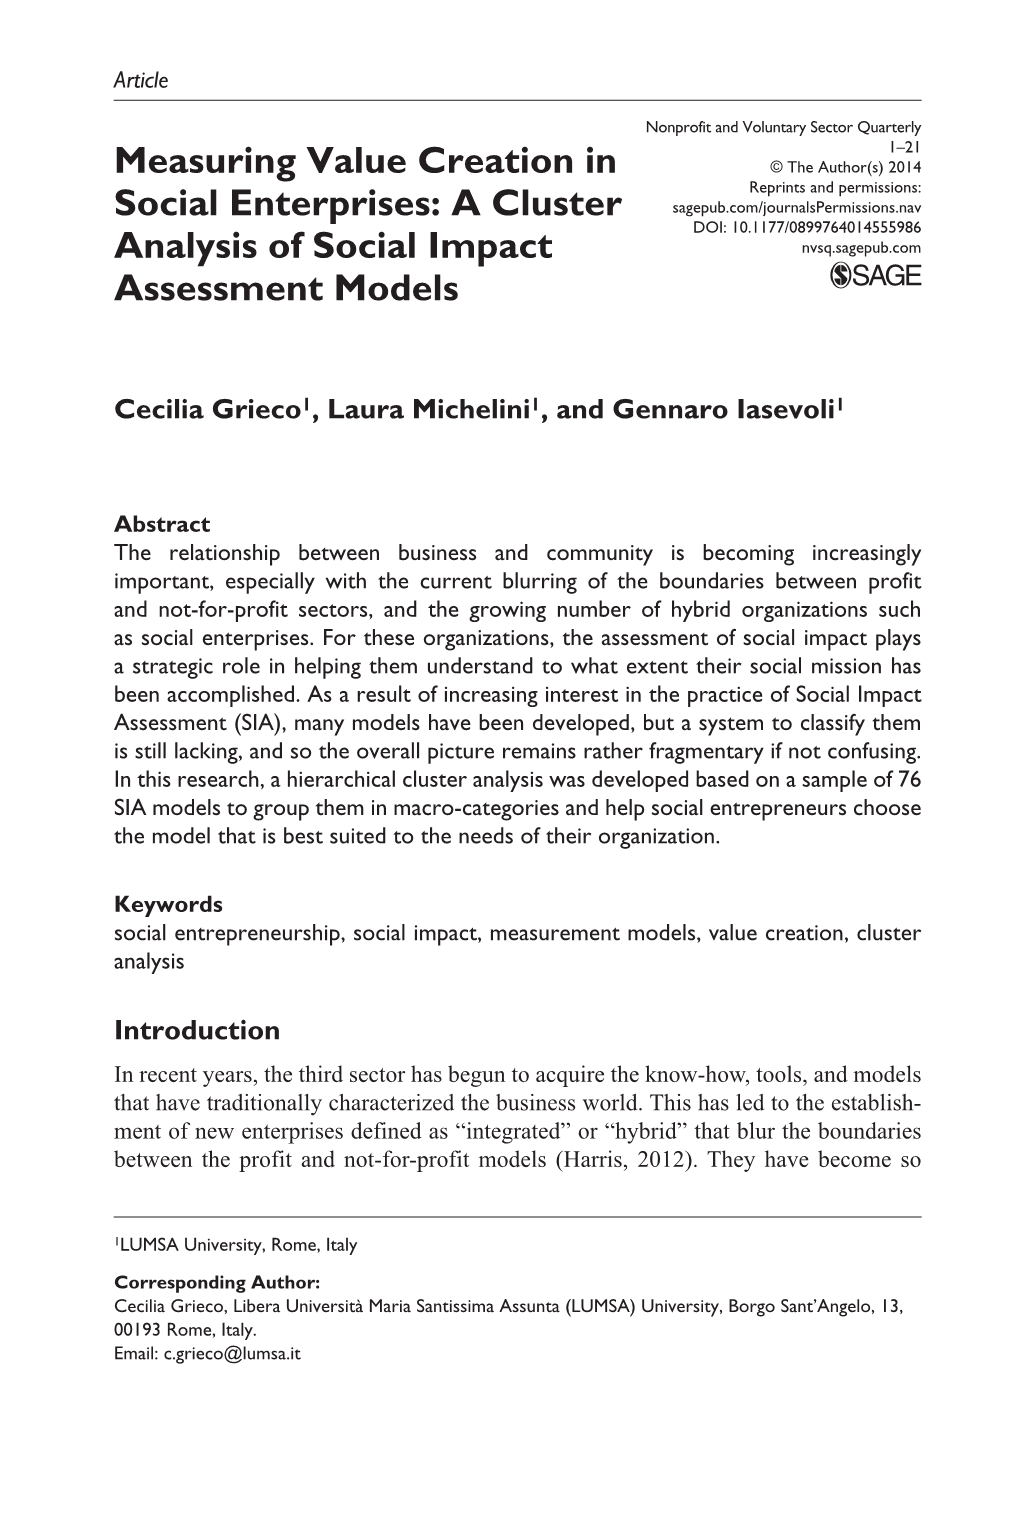 Measuring Value Creation in Social Enterprises: a Cluster Analysis Of